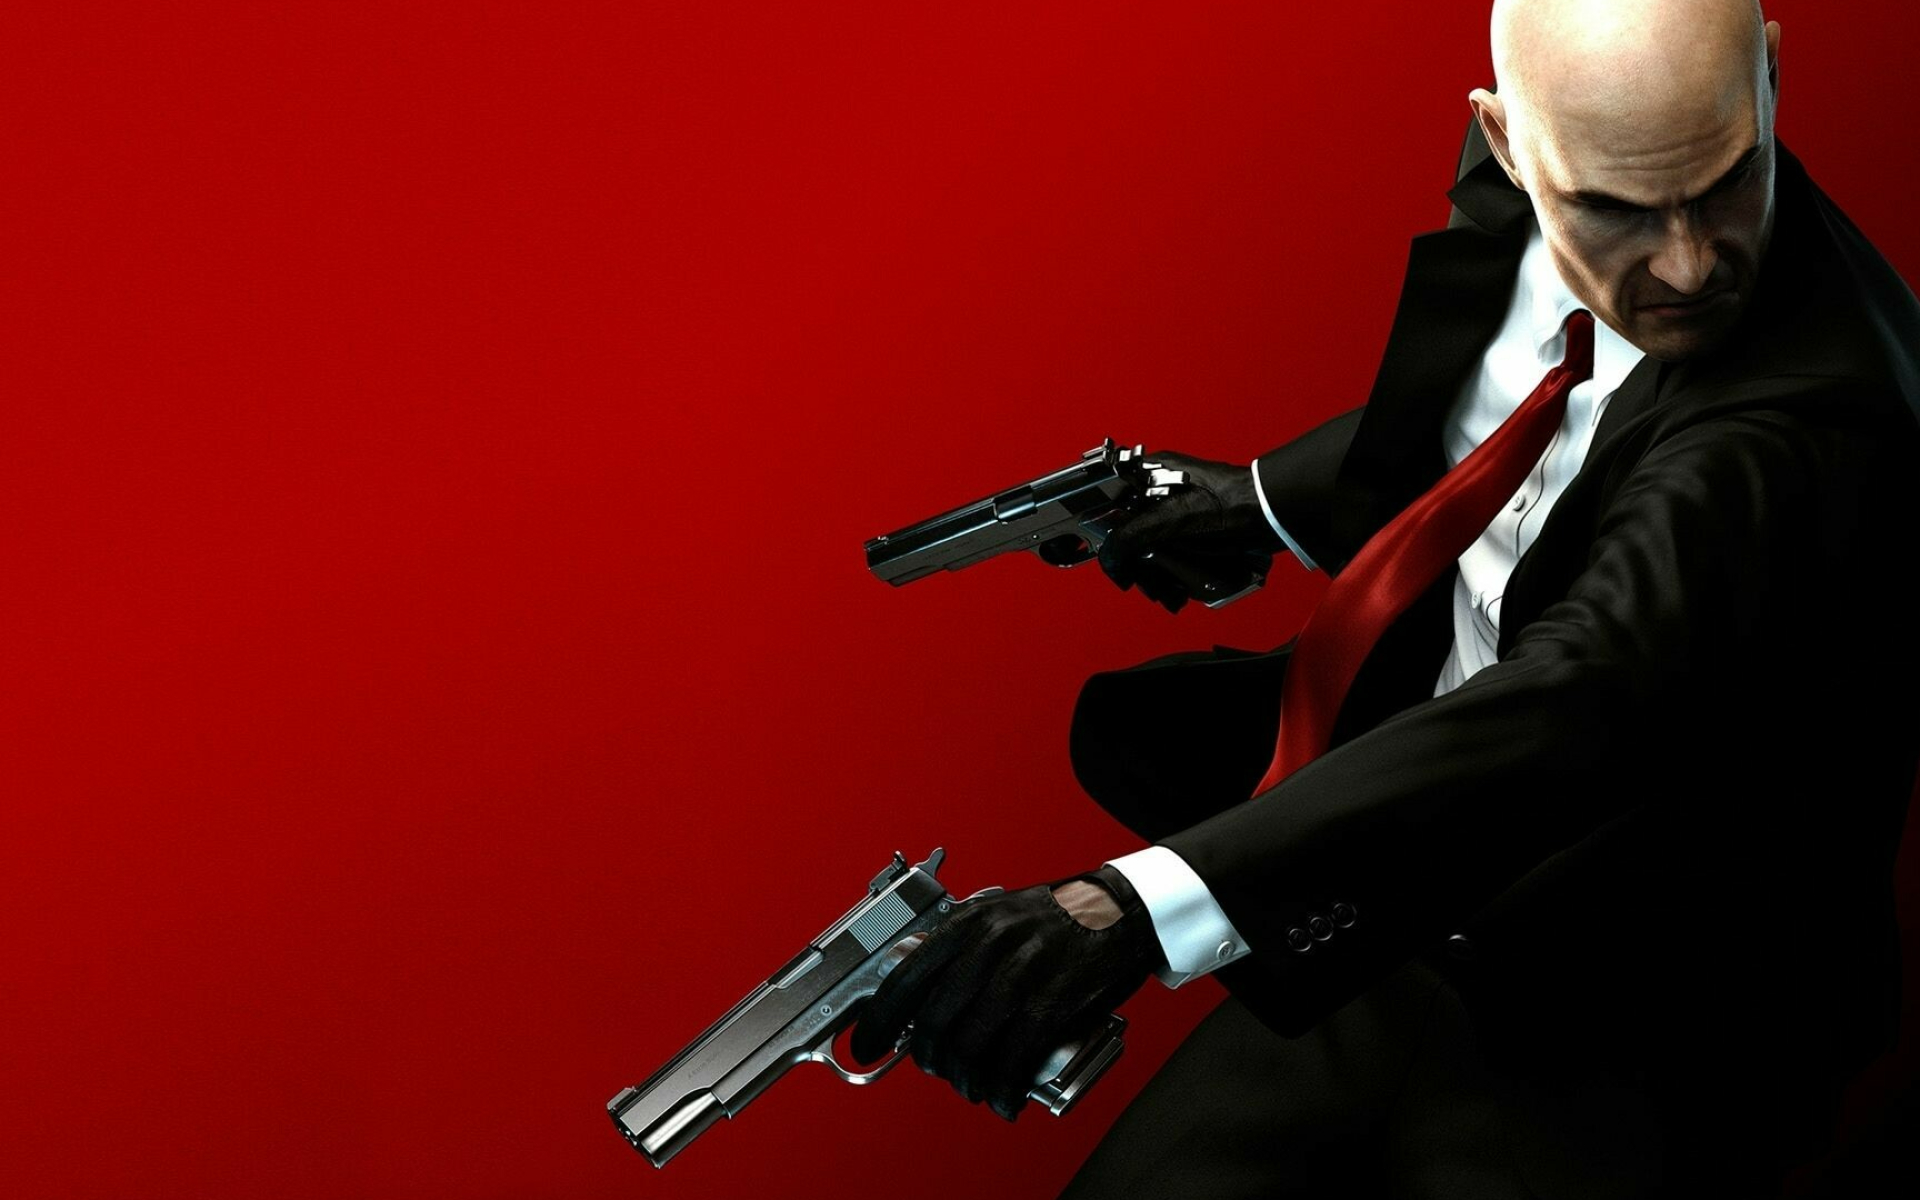 Hitman (Game): Absolution, The fifth installment in the series. 1920x1200 HD Background.